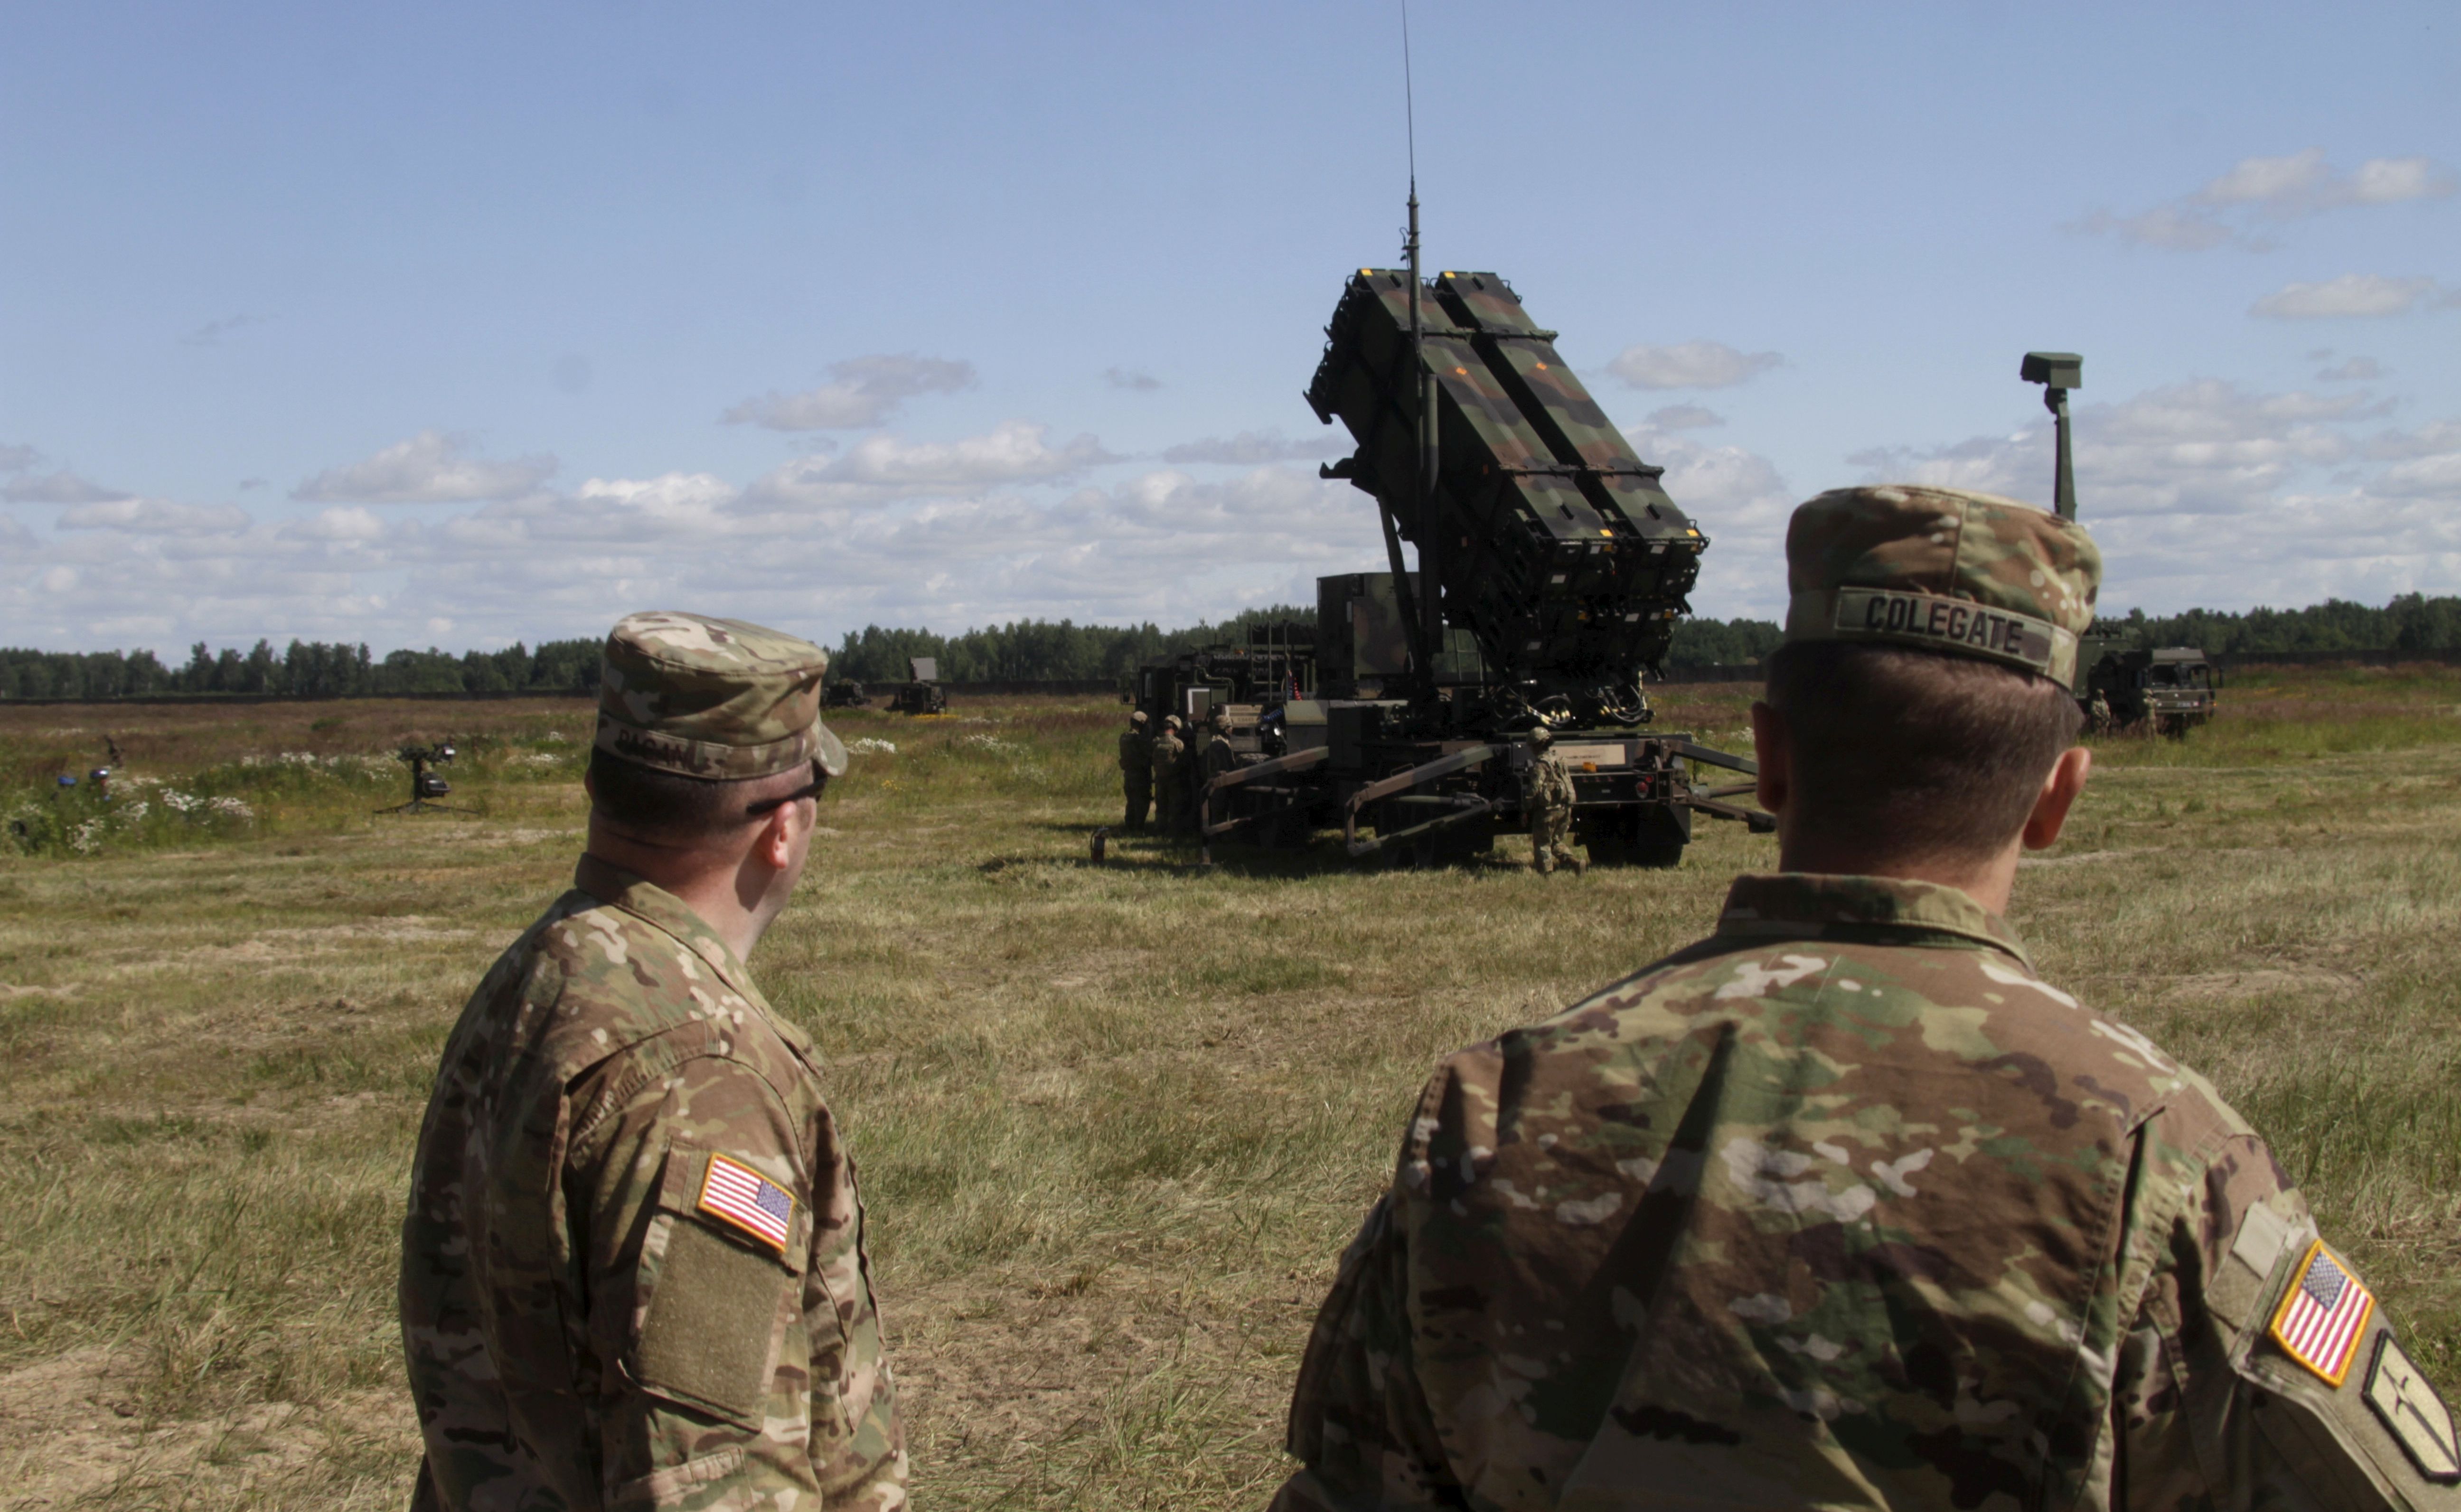 epa06098544 US soldiers stand behind an US surface-to-air missile system 'Patriot' launcher during the air defence exercise 'Tobruq Legacy 2017' at the Sauliai Air base, Lithuania, 20 July 2017. The exercise, which according to AIRCOM, the Allied Air Command of the North Atlantic Treaty Organization (NATO), continues until 22 July mainly aims at serving 'not only as validation of newly obtained capabilities, but provides an opportunity to improve the level of interoperability of multinational Surface-Based Air and Missile Defence systems forces' as said on the AIRCOM's website.  EPA/VALDA KALNINA